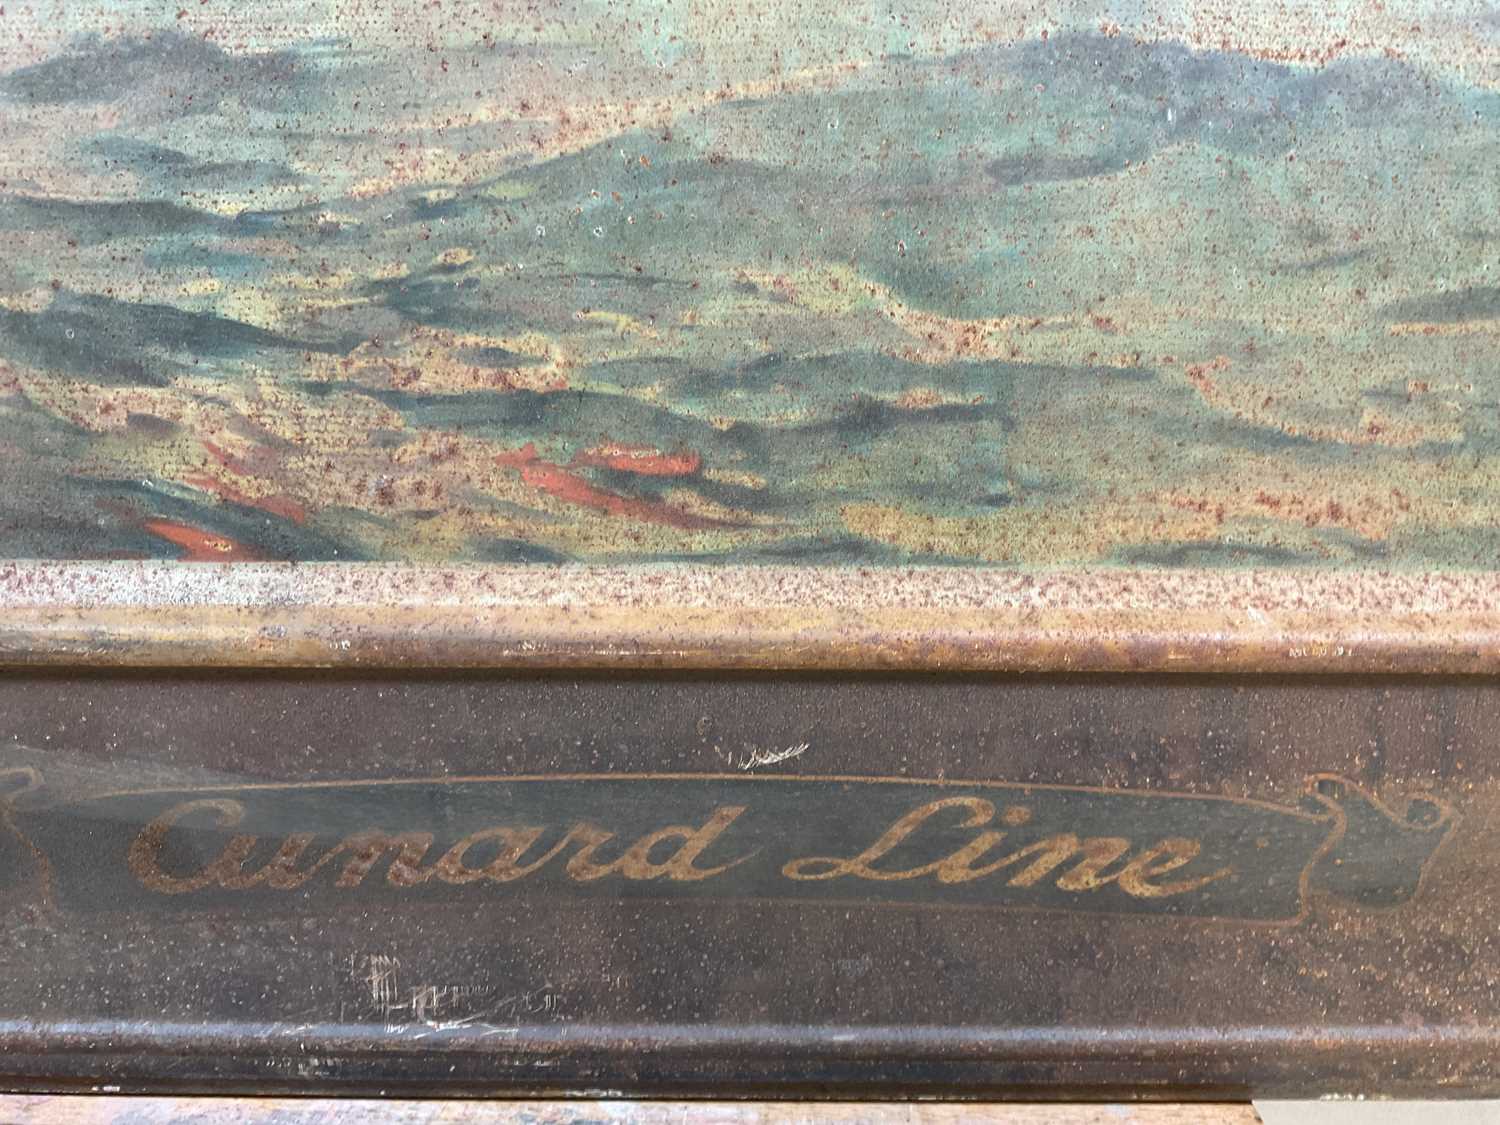 A rare early 20th century chromolithograph on tin advertising sign for the Cunard Line depicting the - Image 3 of 5